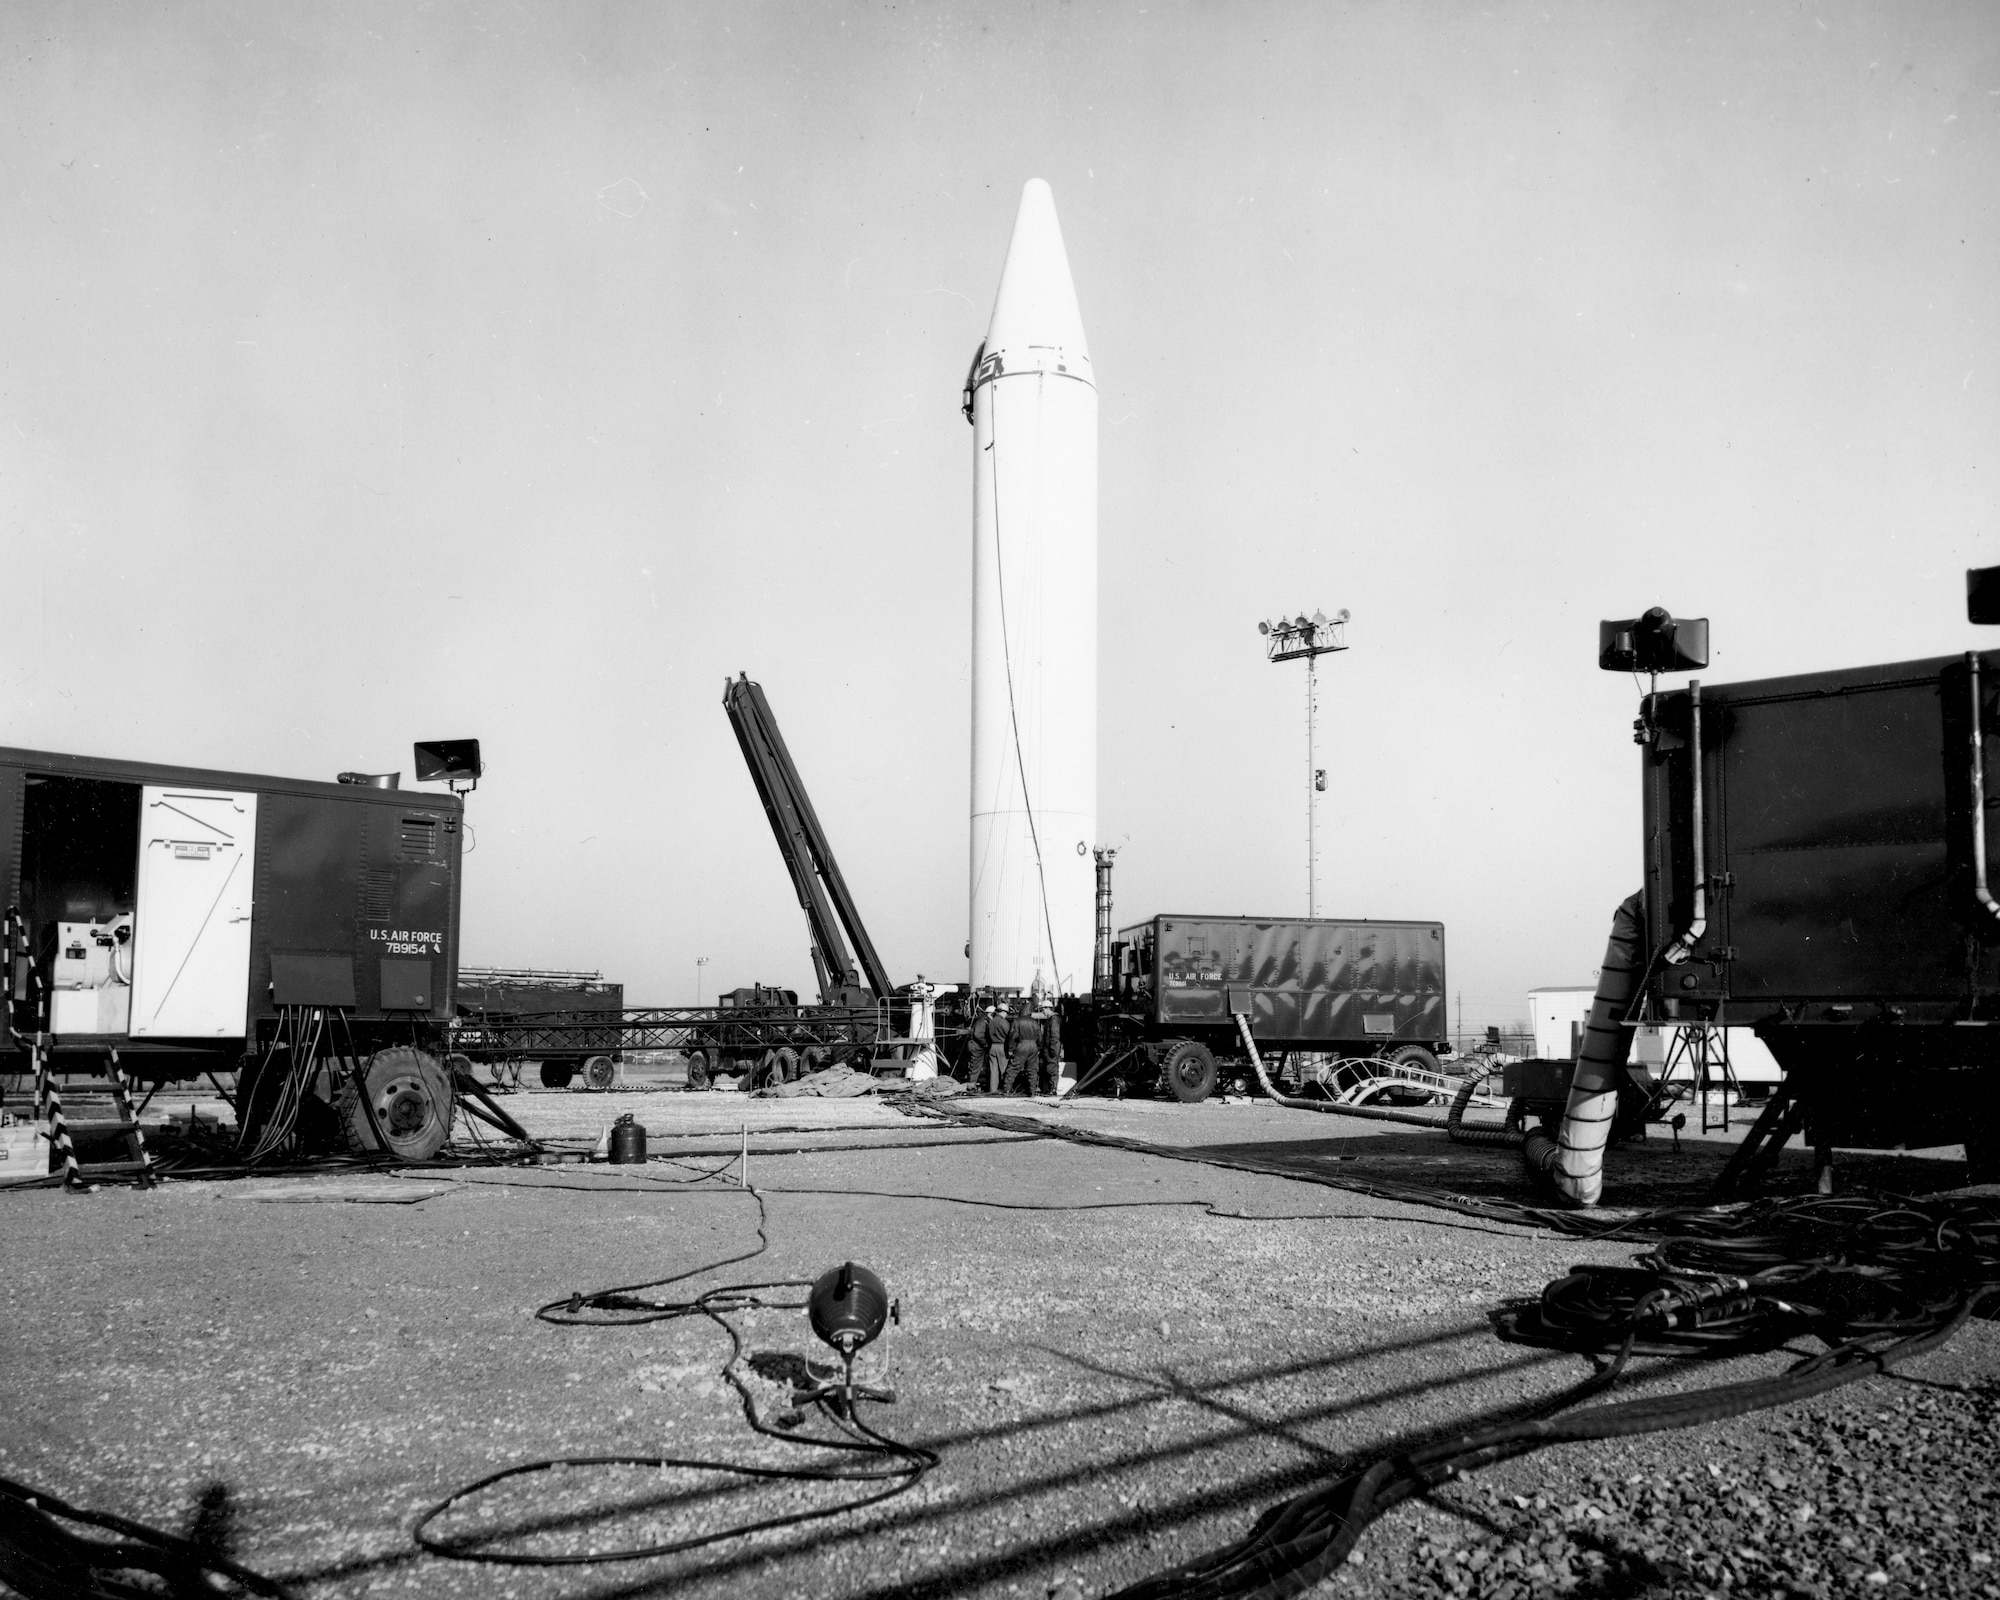 Jupiter ground support equipment was complex, involving vehicles carrying liquid oxygen, hydraulic and pneumatic equipment, generators, and other tools.
Black and white image of the white jupiter missile surrounded by servicing equipment.